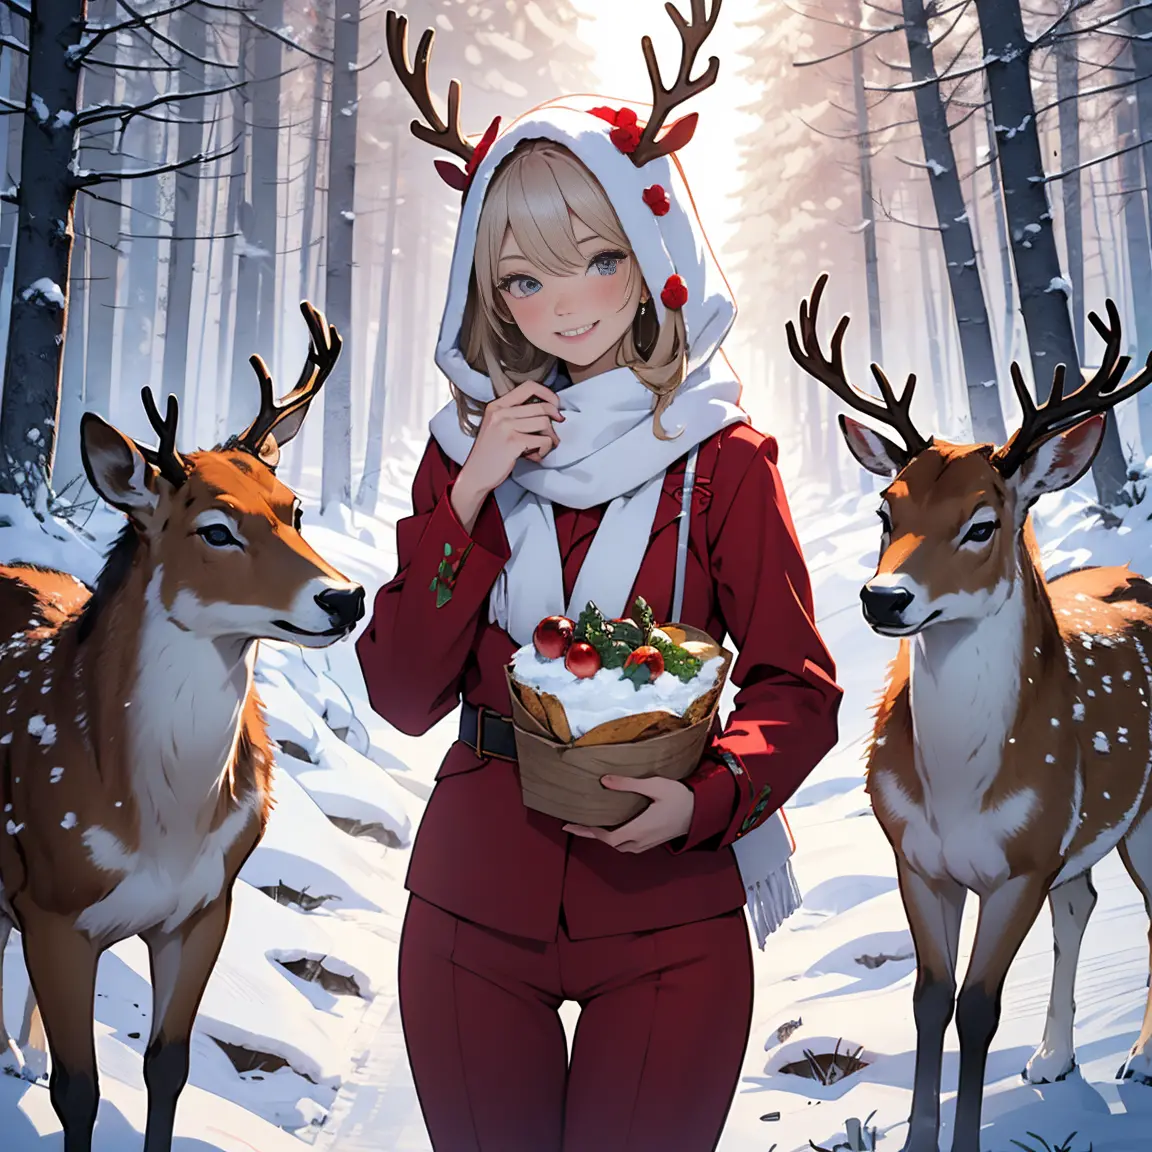 Merry Christmas, Snow Maiden in a sexy red suit, Smiling, Forest deer, Snow Maiden feeds deer bread, forest with trees, garlands...